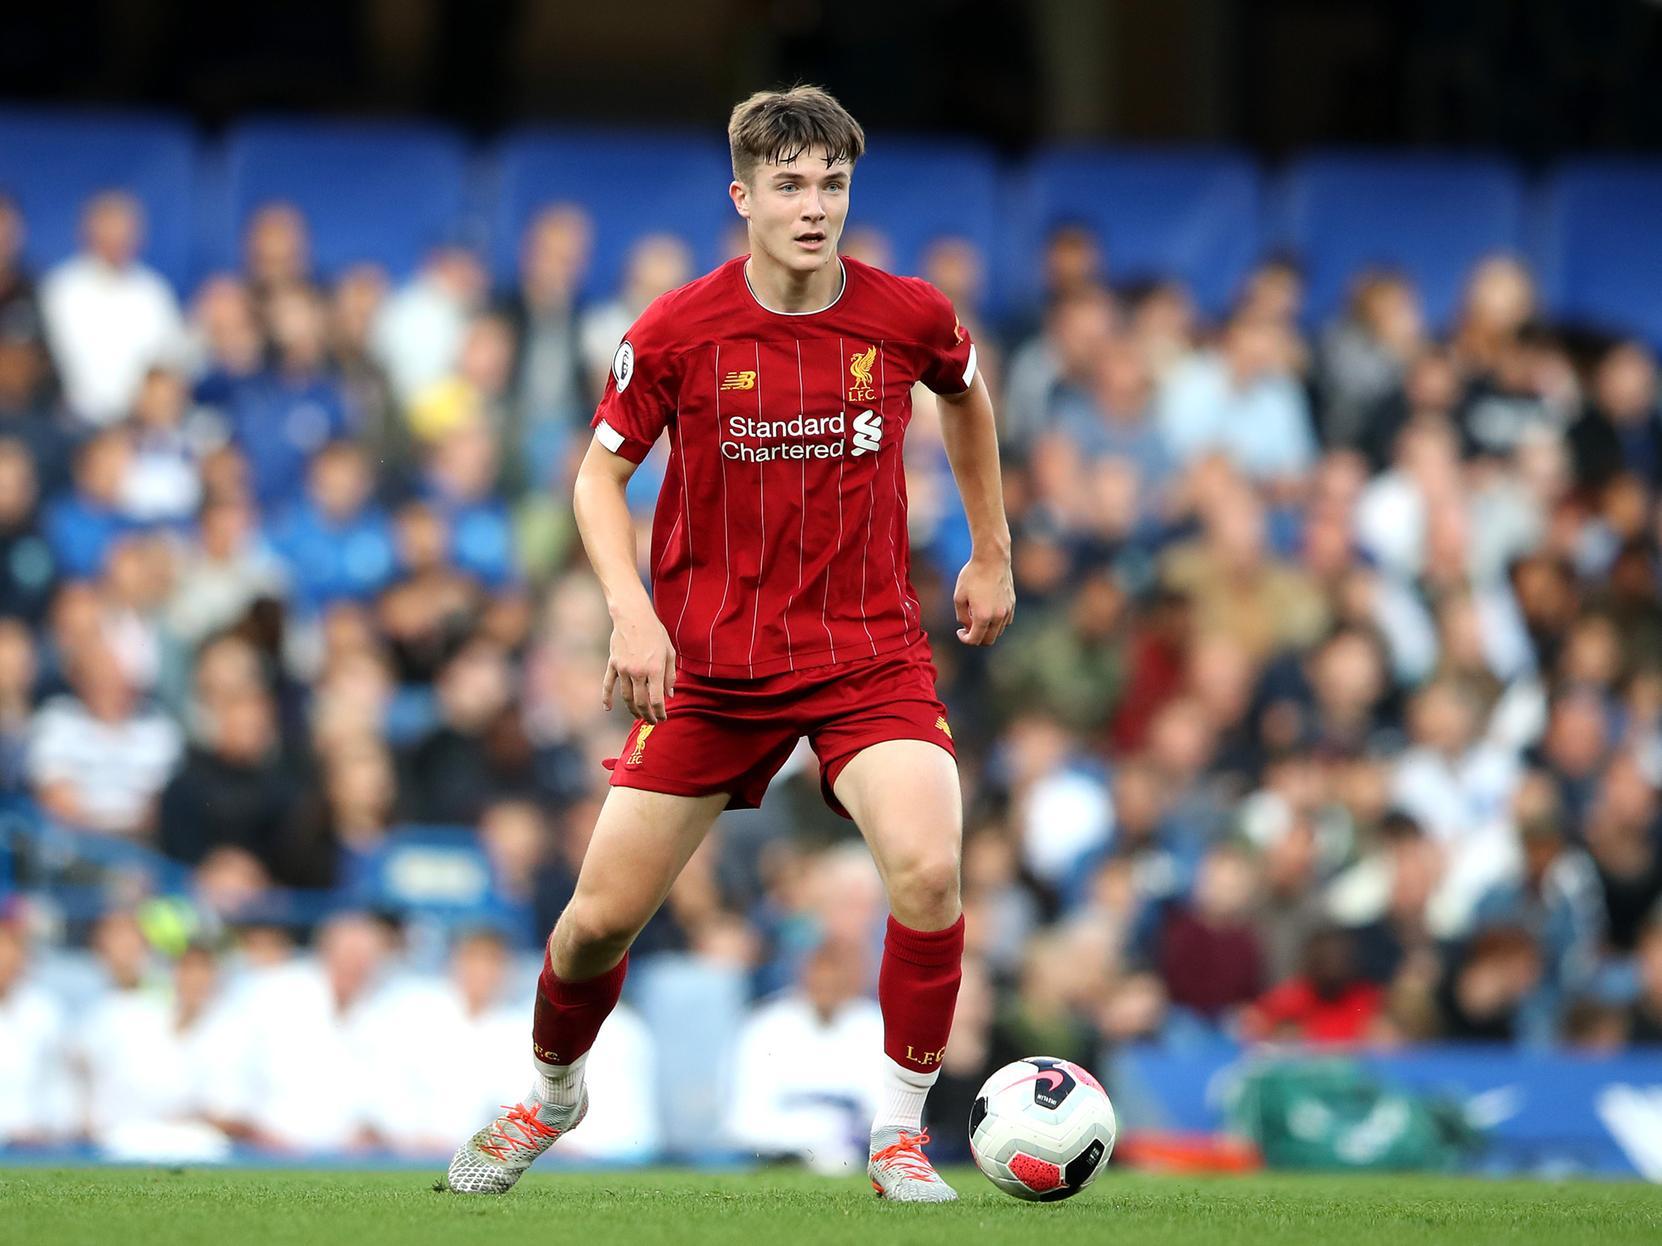 Boyes, an 18-year-old central defender, has featured twice in the cups this season but is highly unlikely to get in Liverpools first team ahead of Joe Gomez, Virgil van Dijk or Joel Matip.